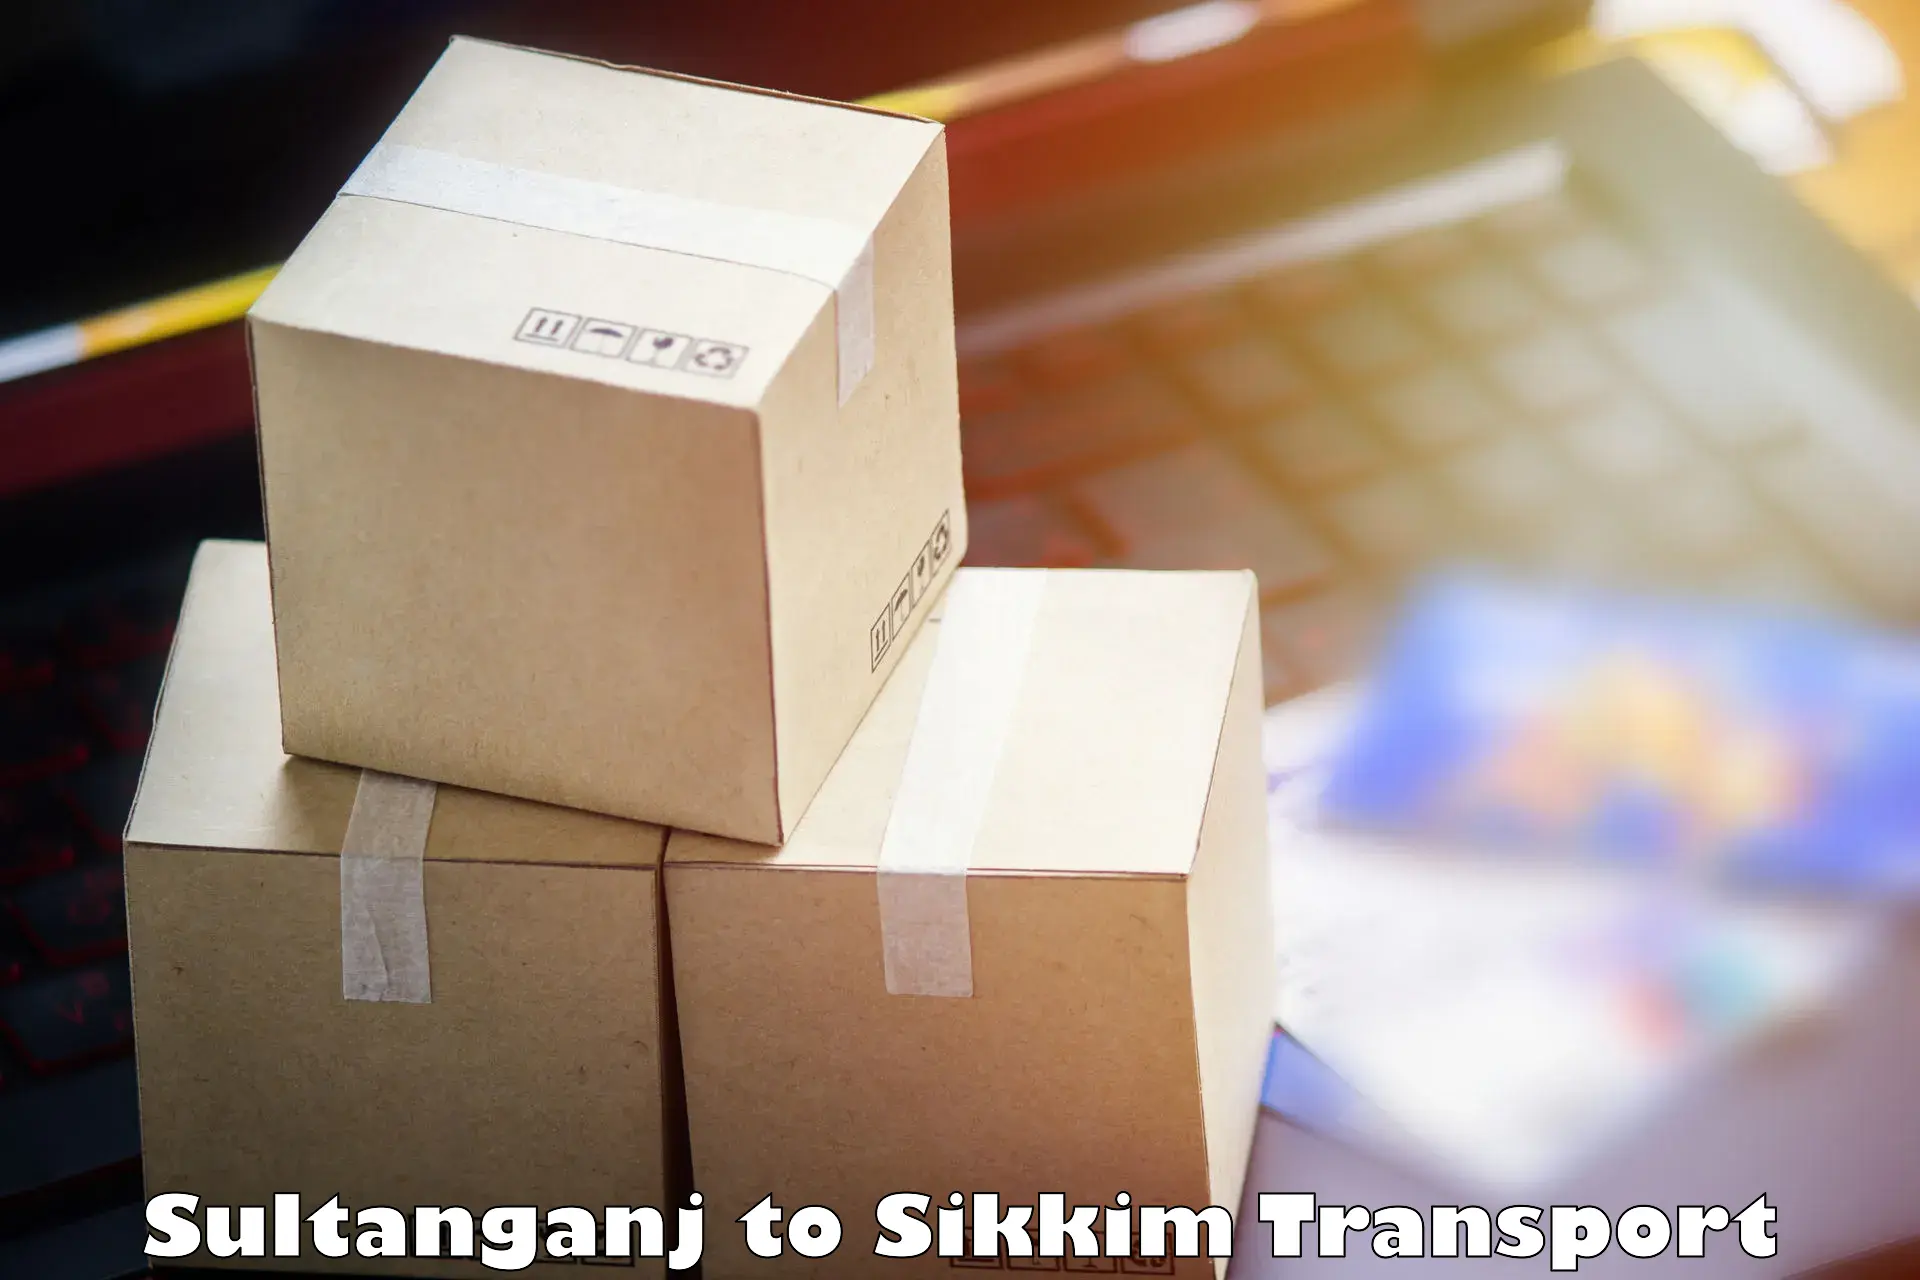 Delivery service Sultanganj to Rangpo